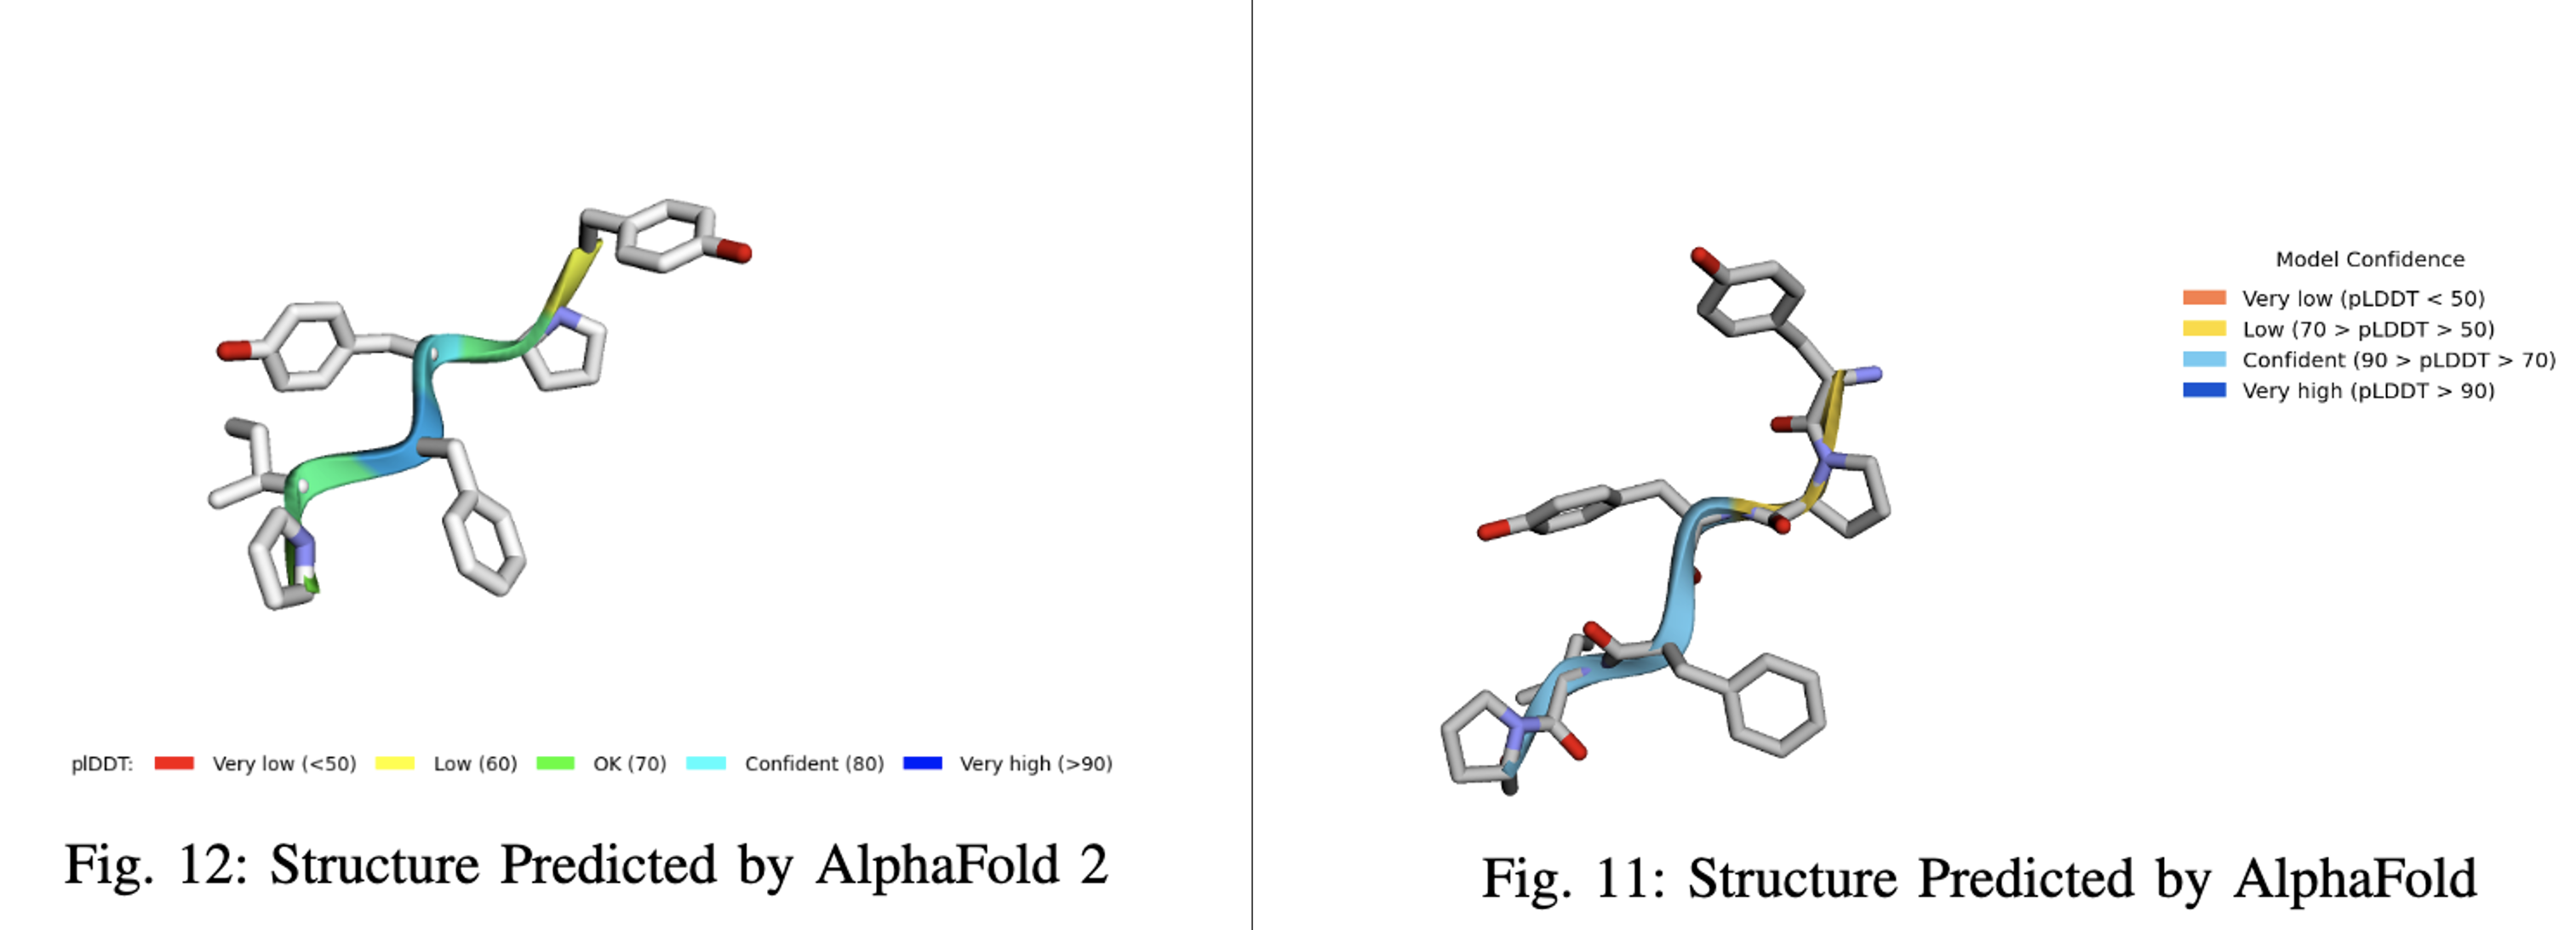 Variational Quantum Algorithms for Chemical Simulation and Drug
  Discovery